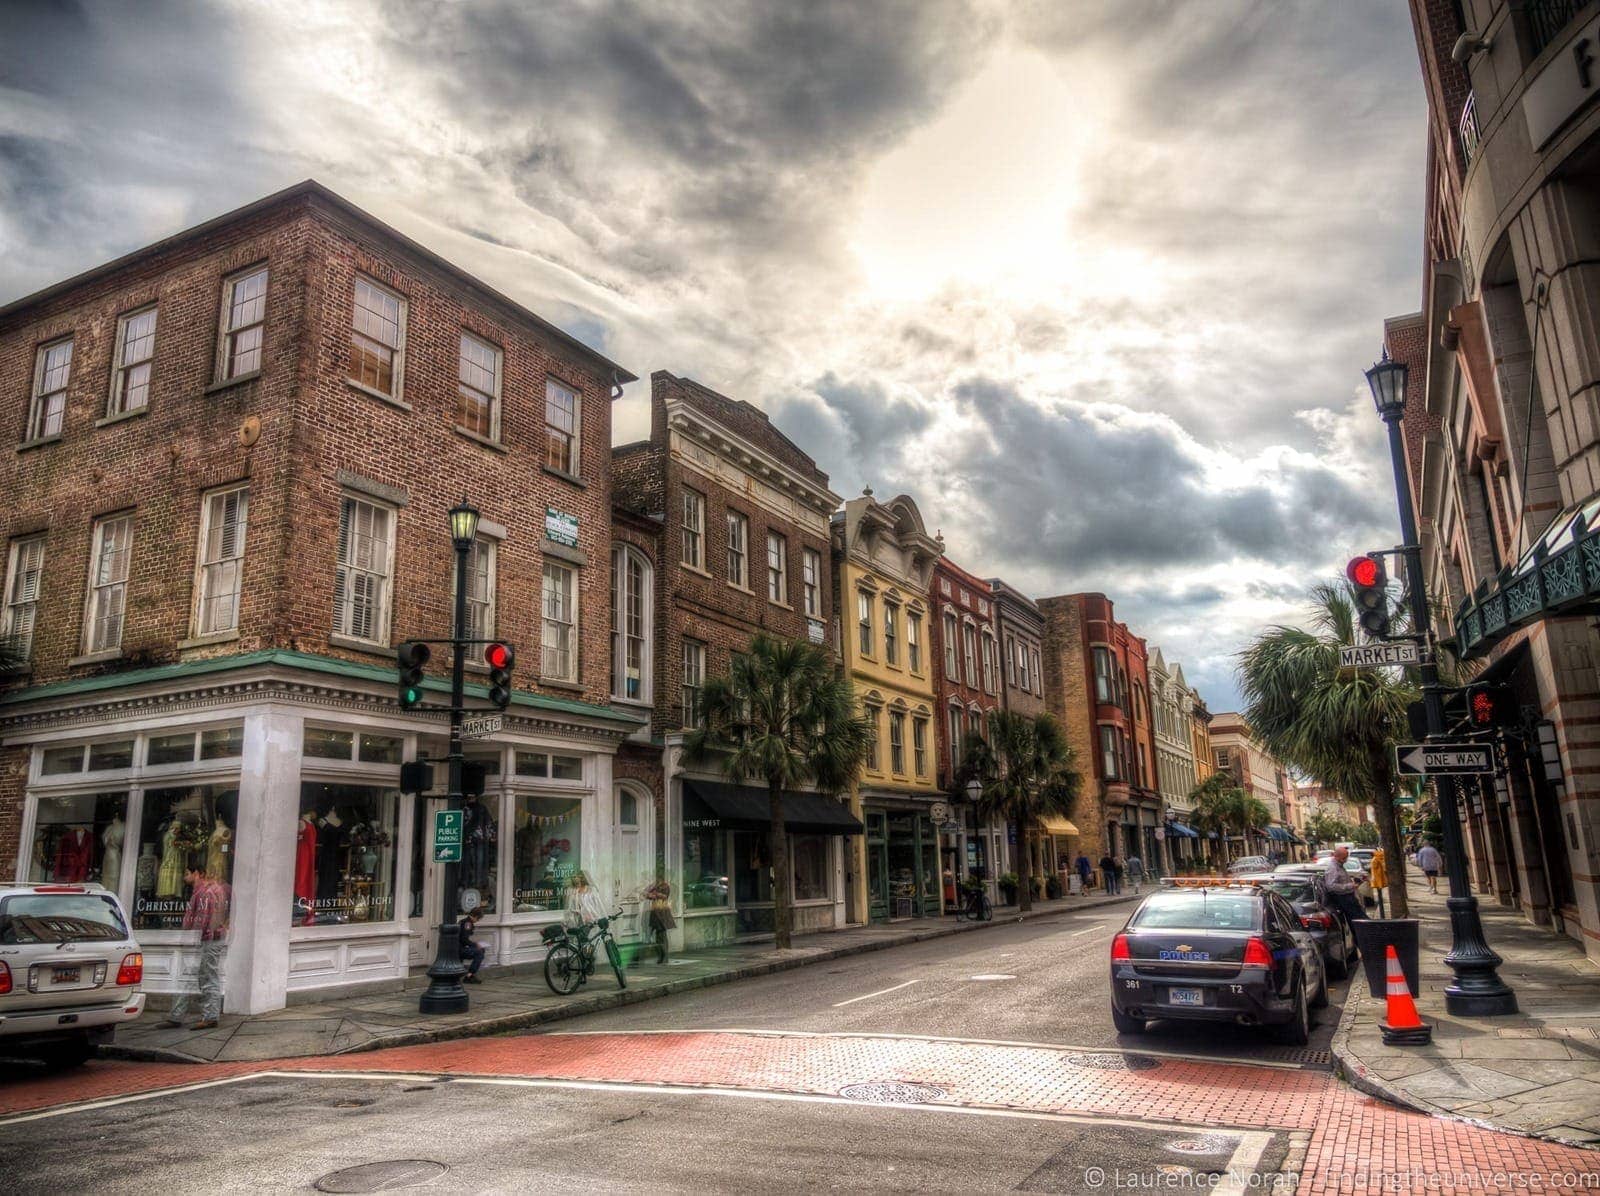 Things To Do in Charleston, South Carolina, for Every Type of Traveler